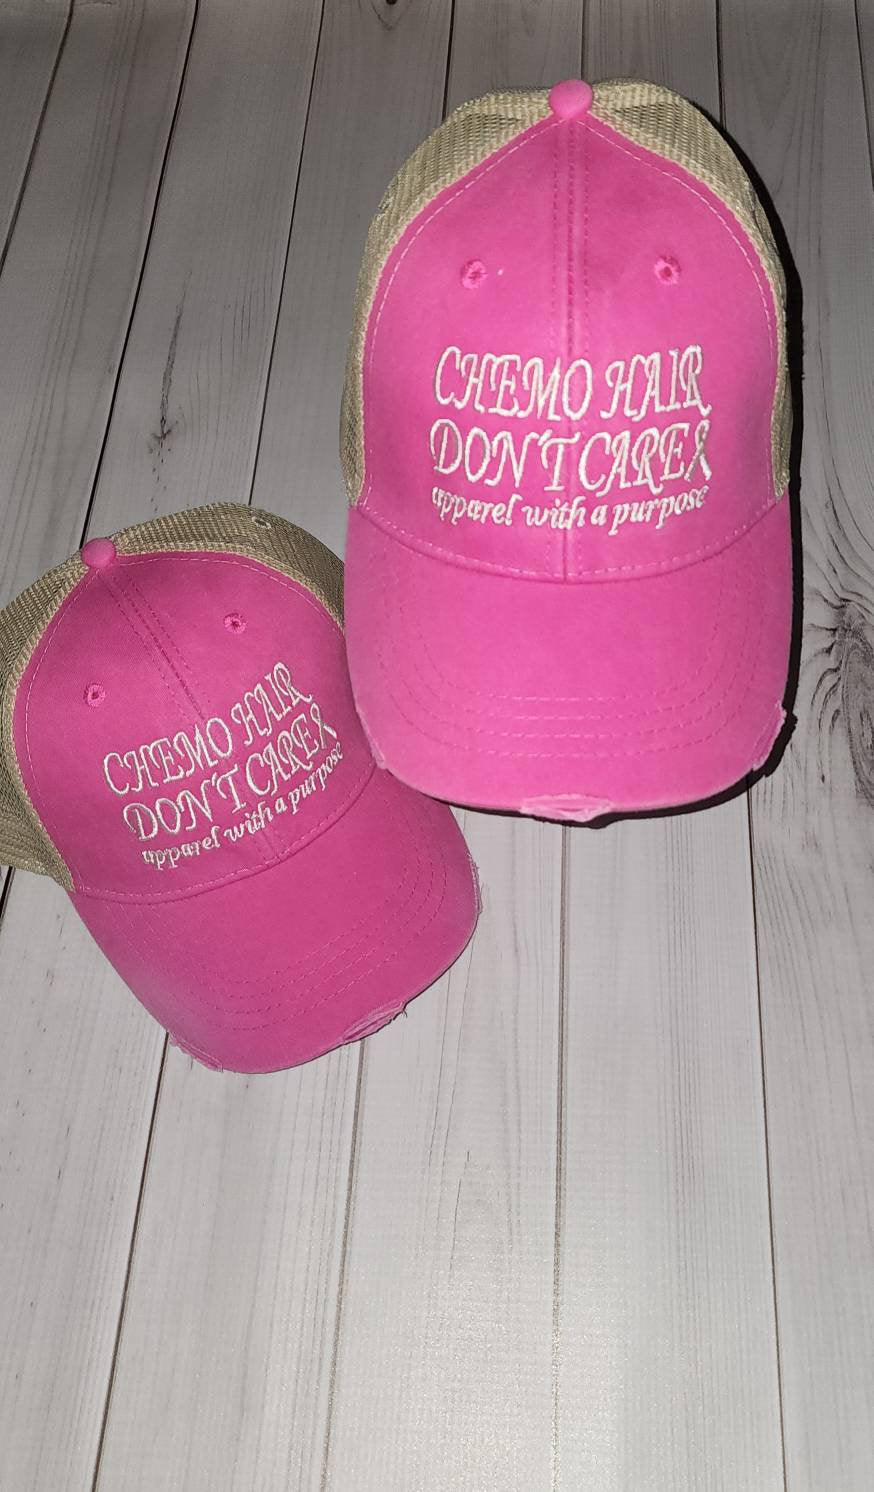 Pink Denim "apparel with a purpose" Distressed Trucker Hats